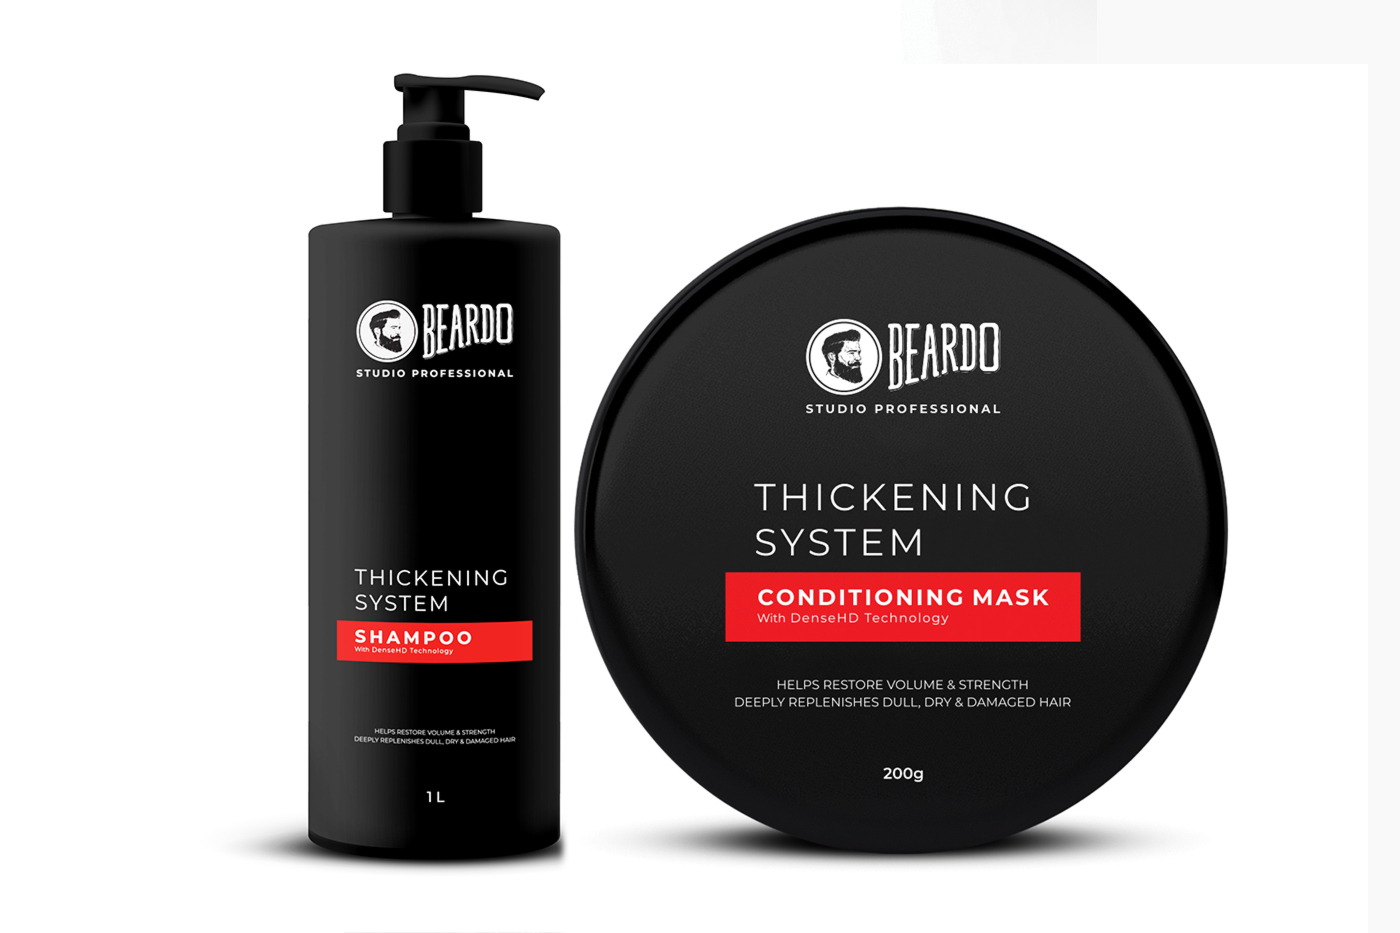 Beardo presents professional haircare products